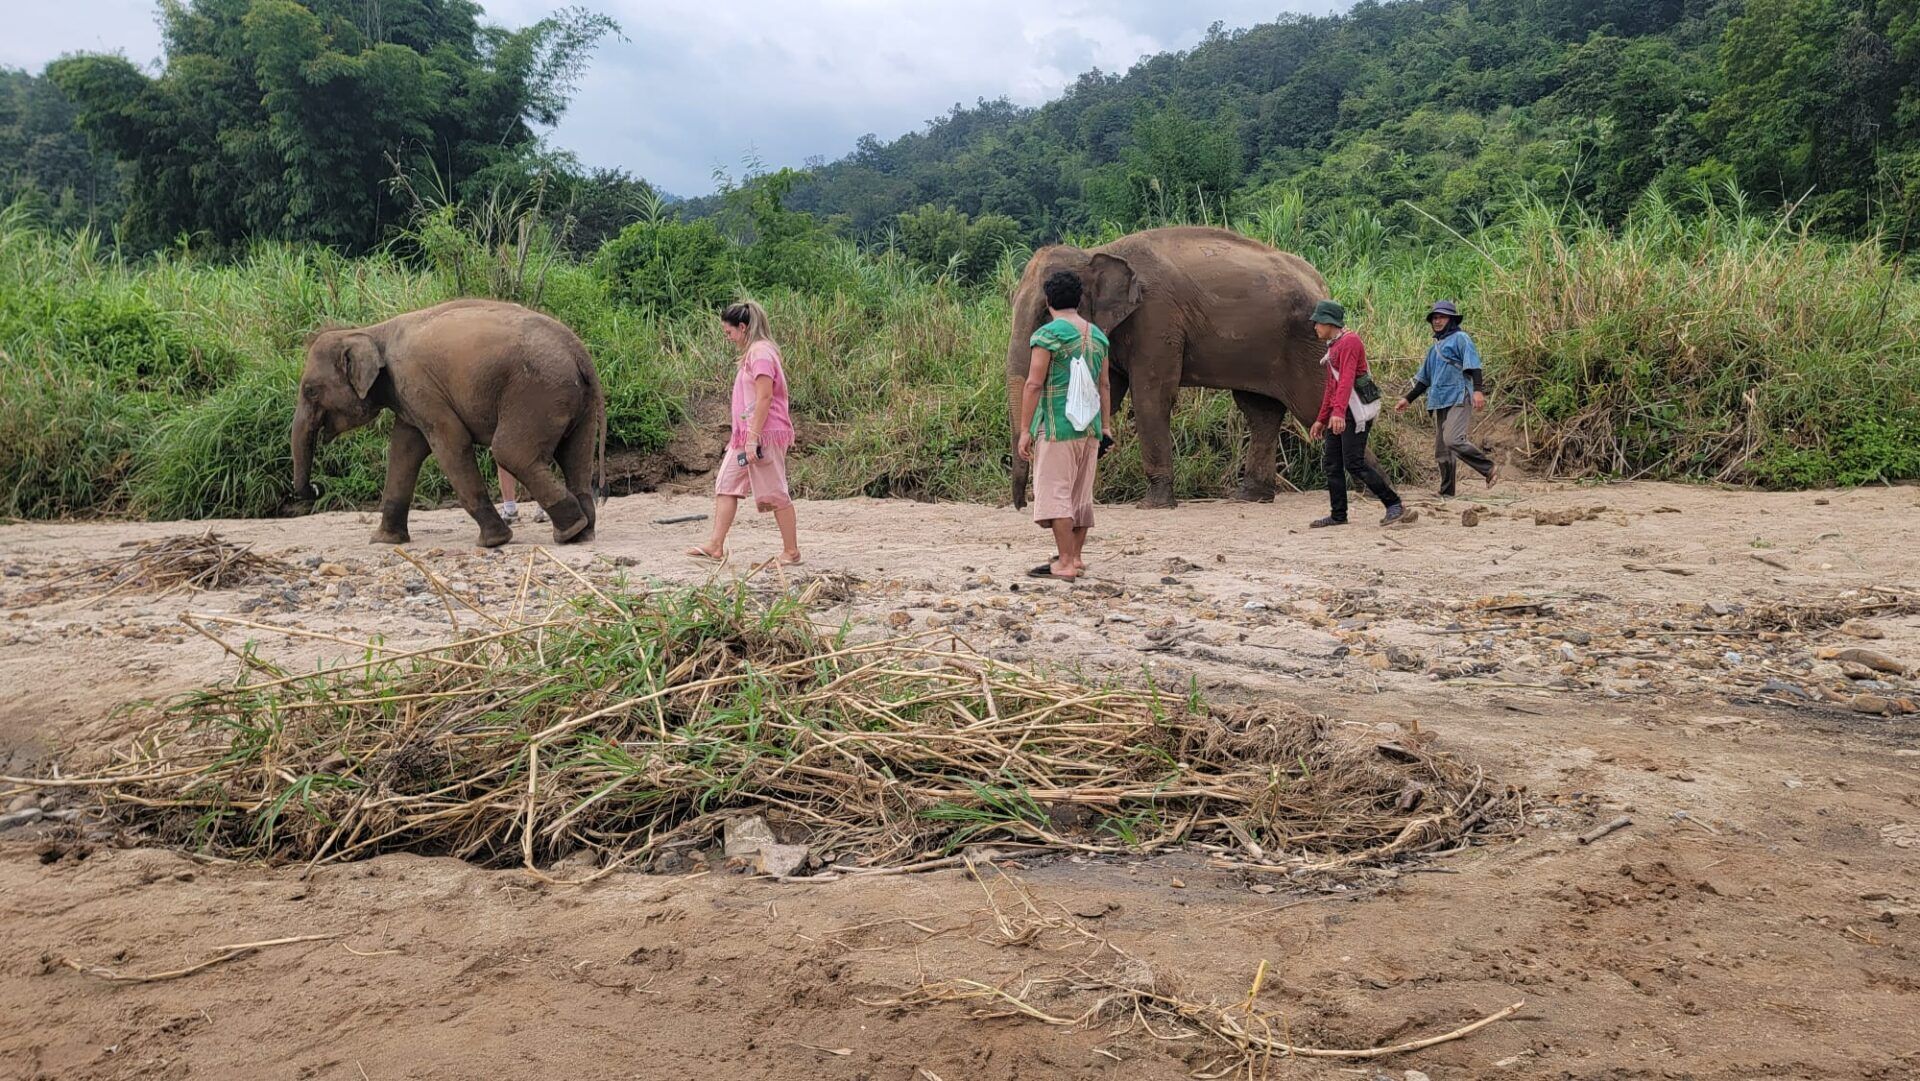 A group of people walking with elephants at the Elephant Freedom Project. Visit our Image Gallery to see more!